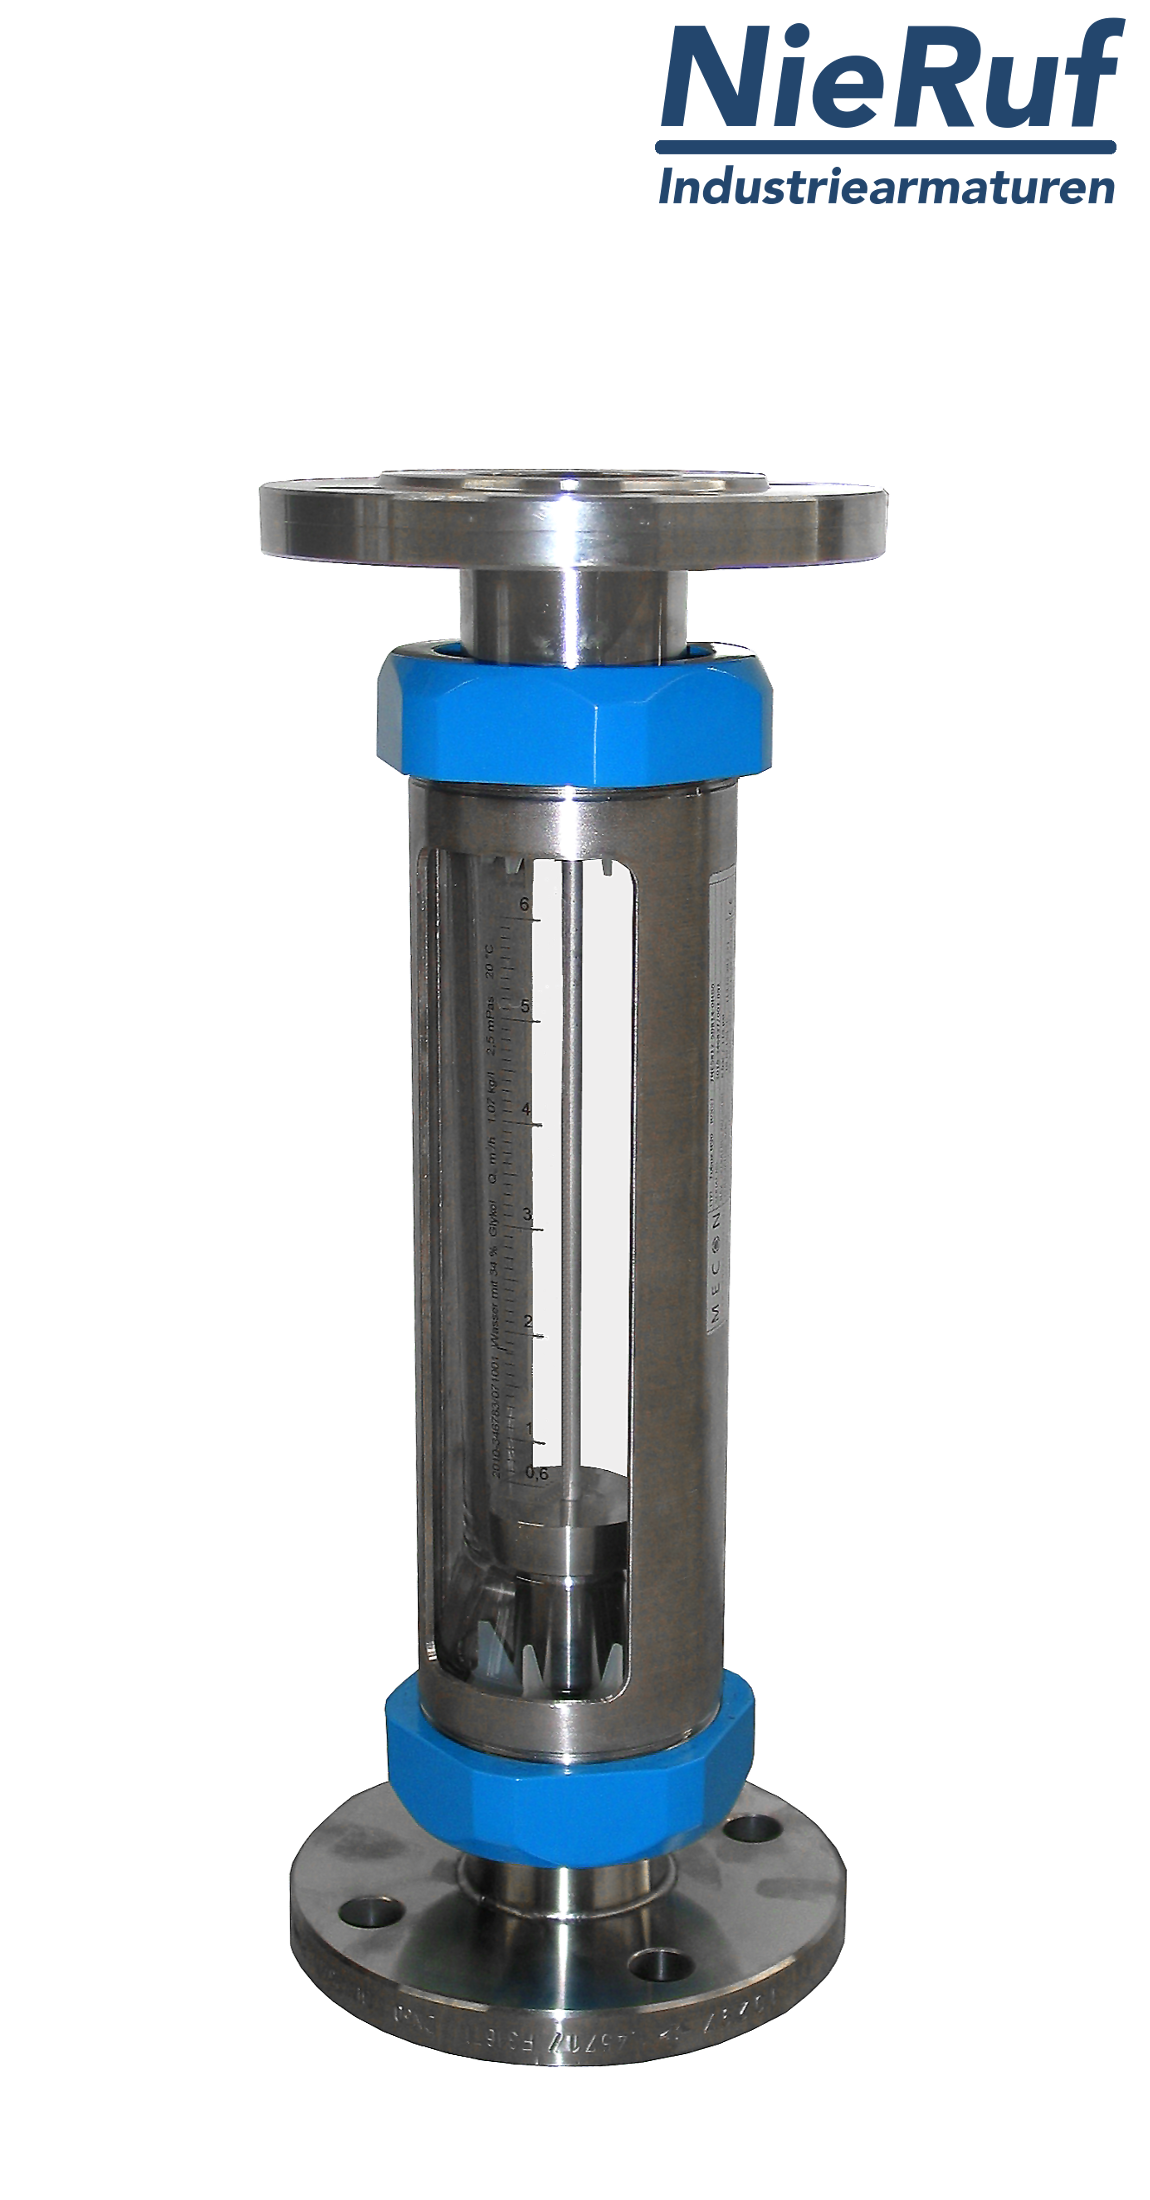 Variable area flowmeter stainless steel + borosilicate flange DN40 100.0 - 1000 l/h water FKM